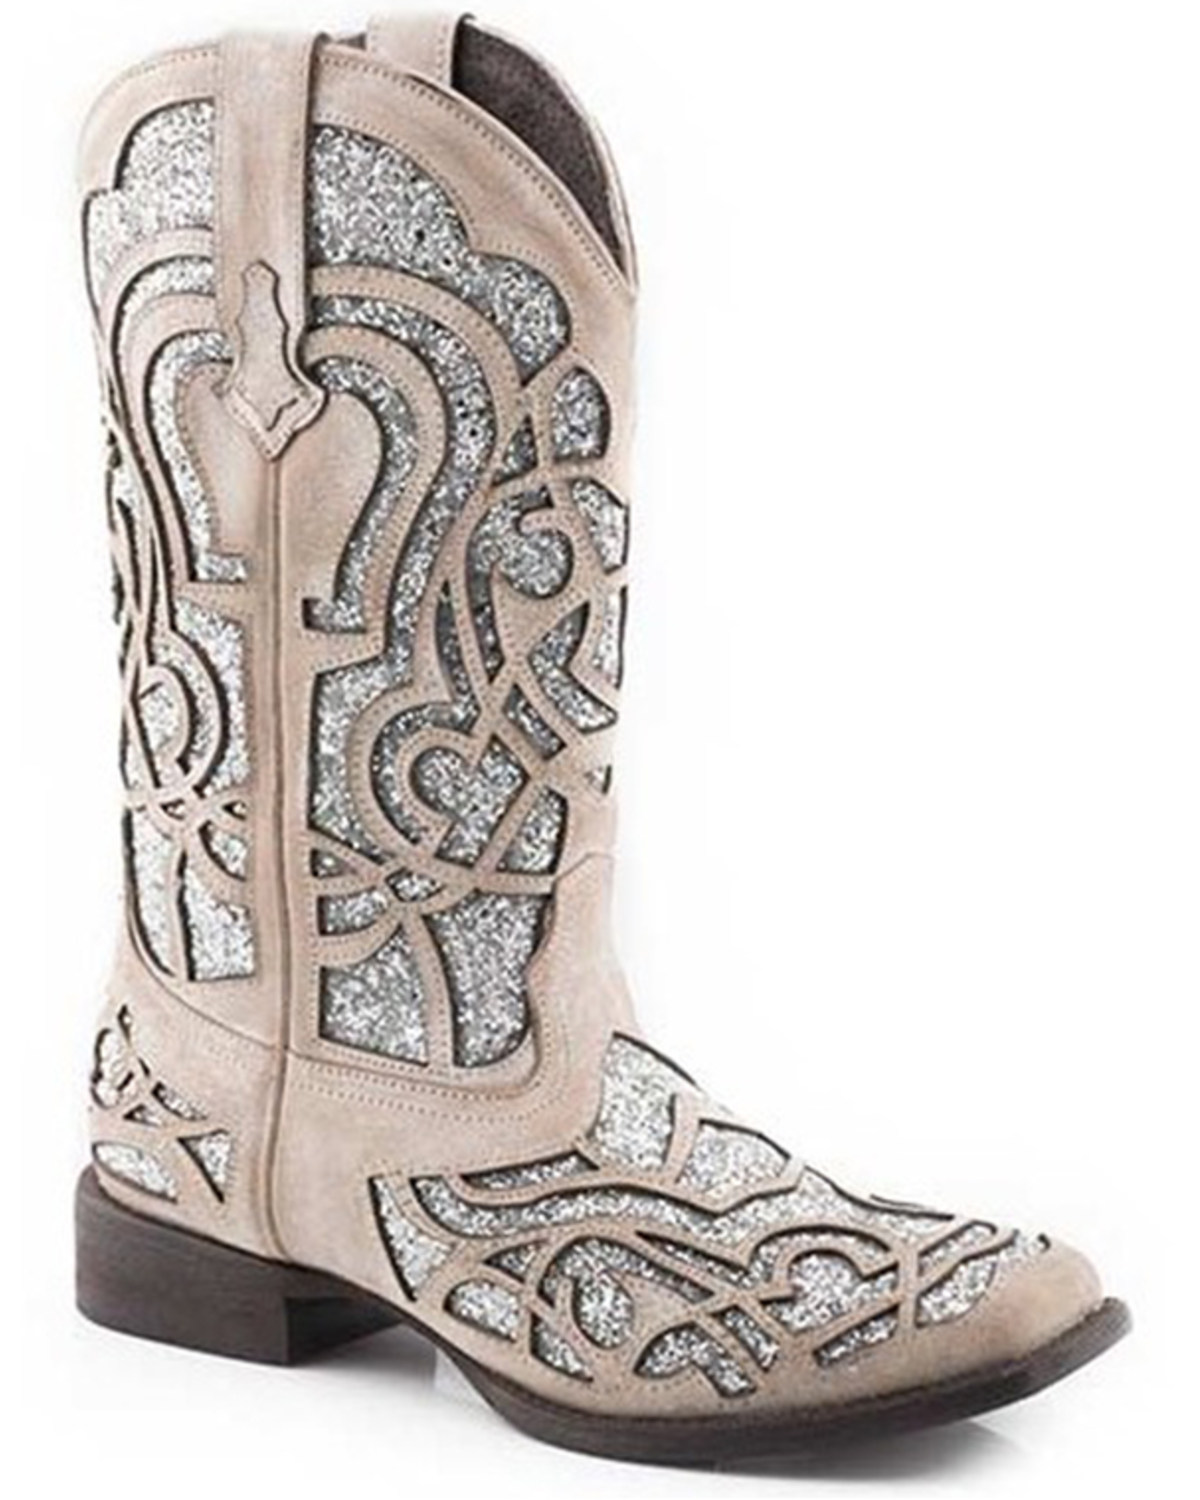 Roper Women's Mercedes Western Performance Boots - Broad Square Toe